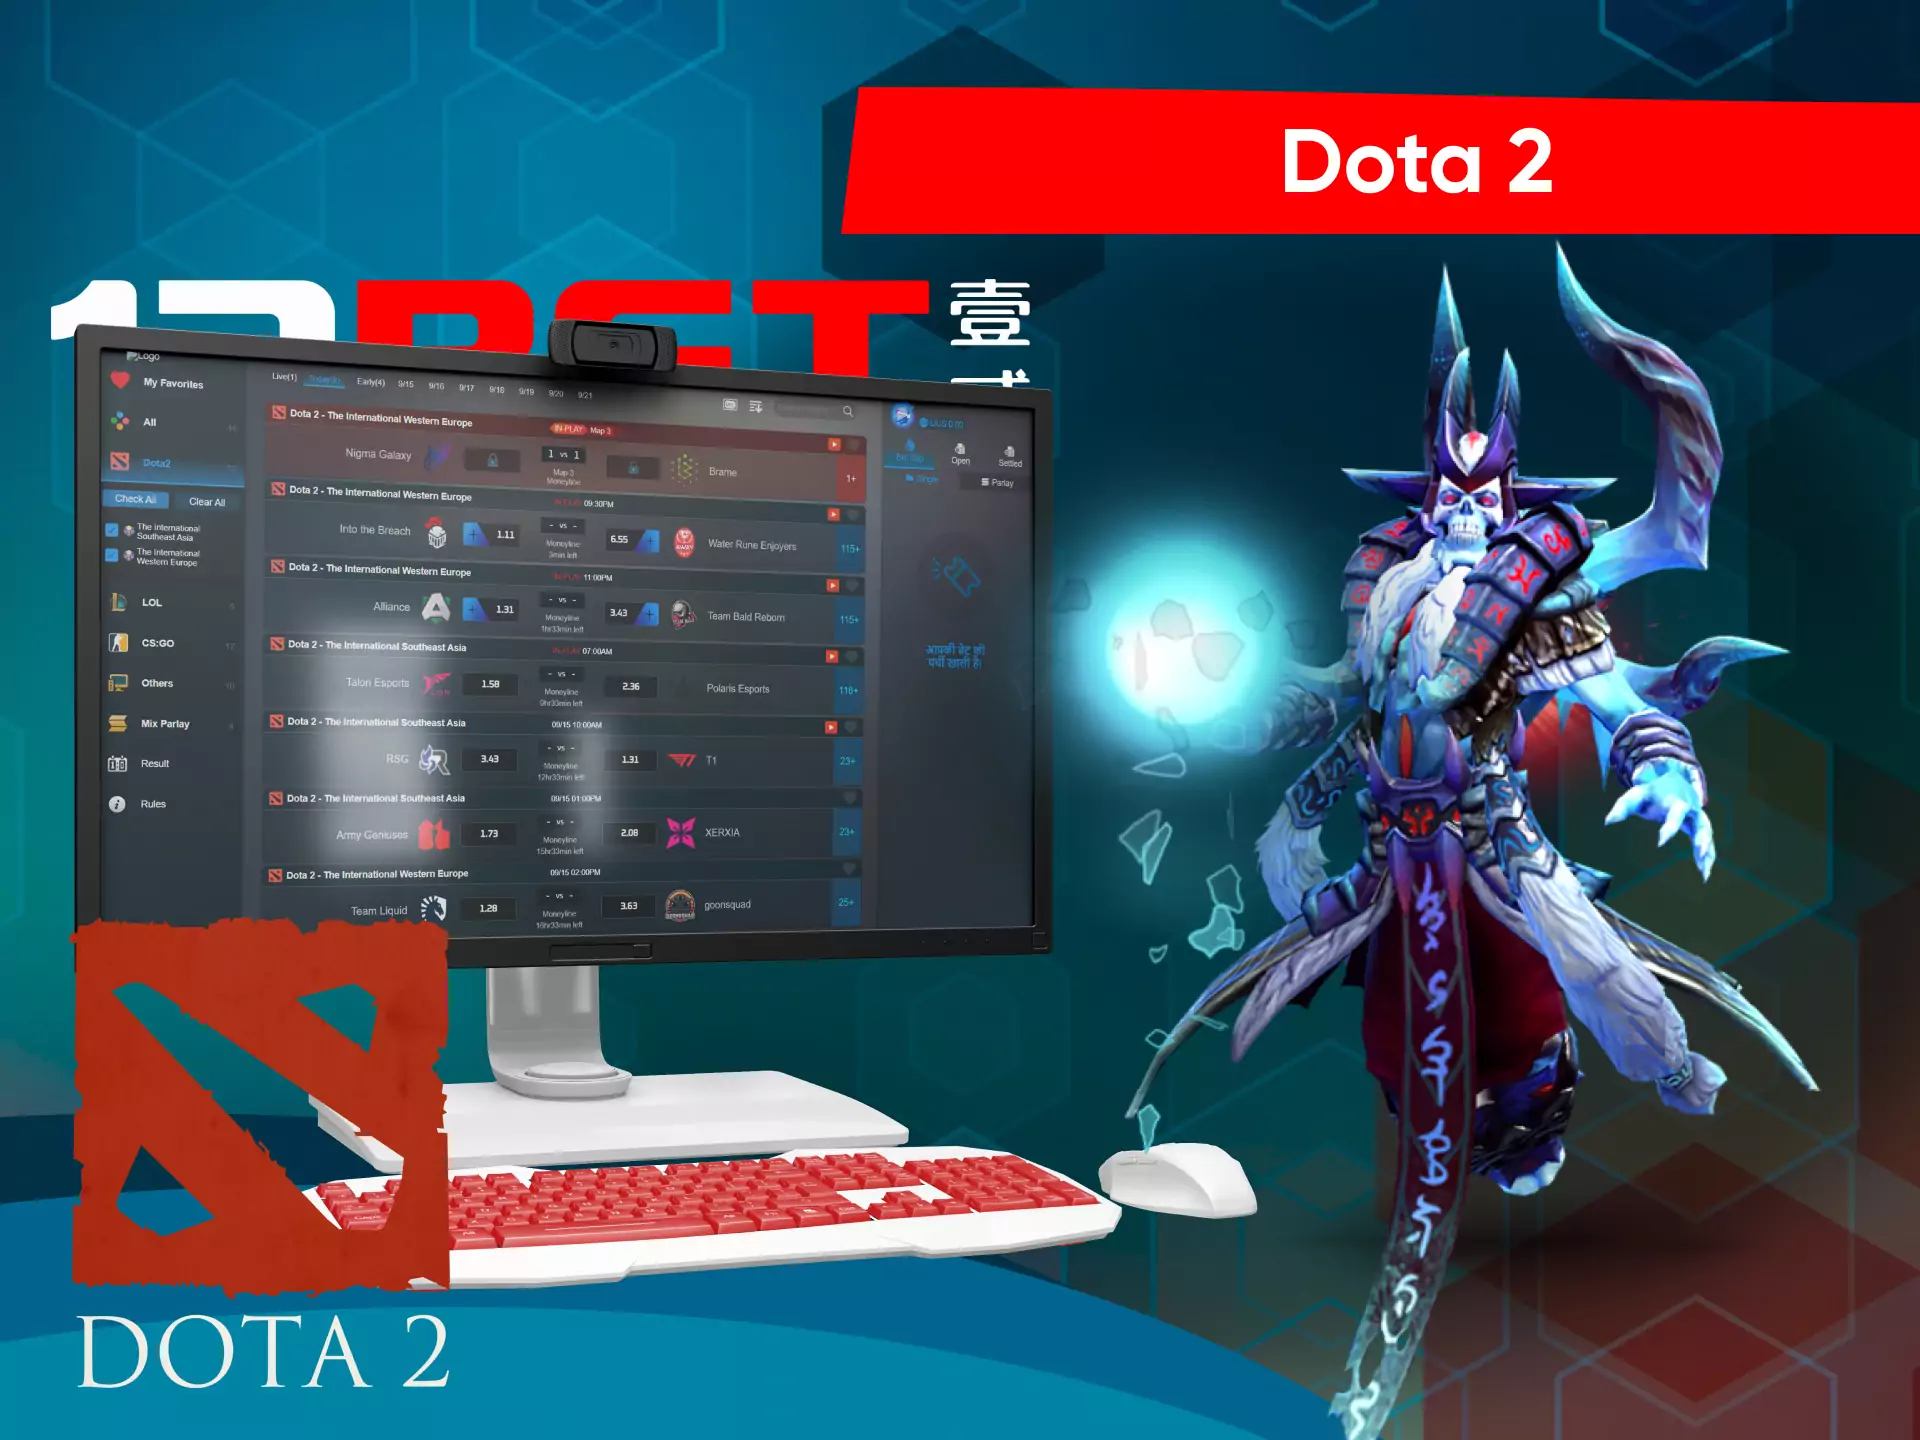 In the esports section of 12bet, you can bet online on Dota 2 matches.